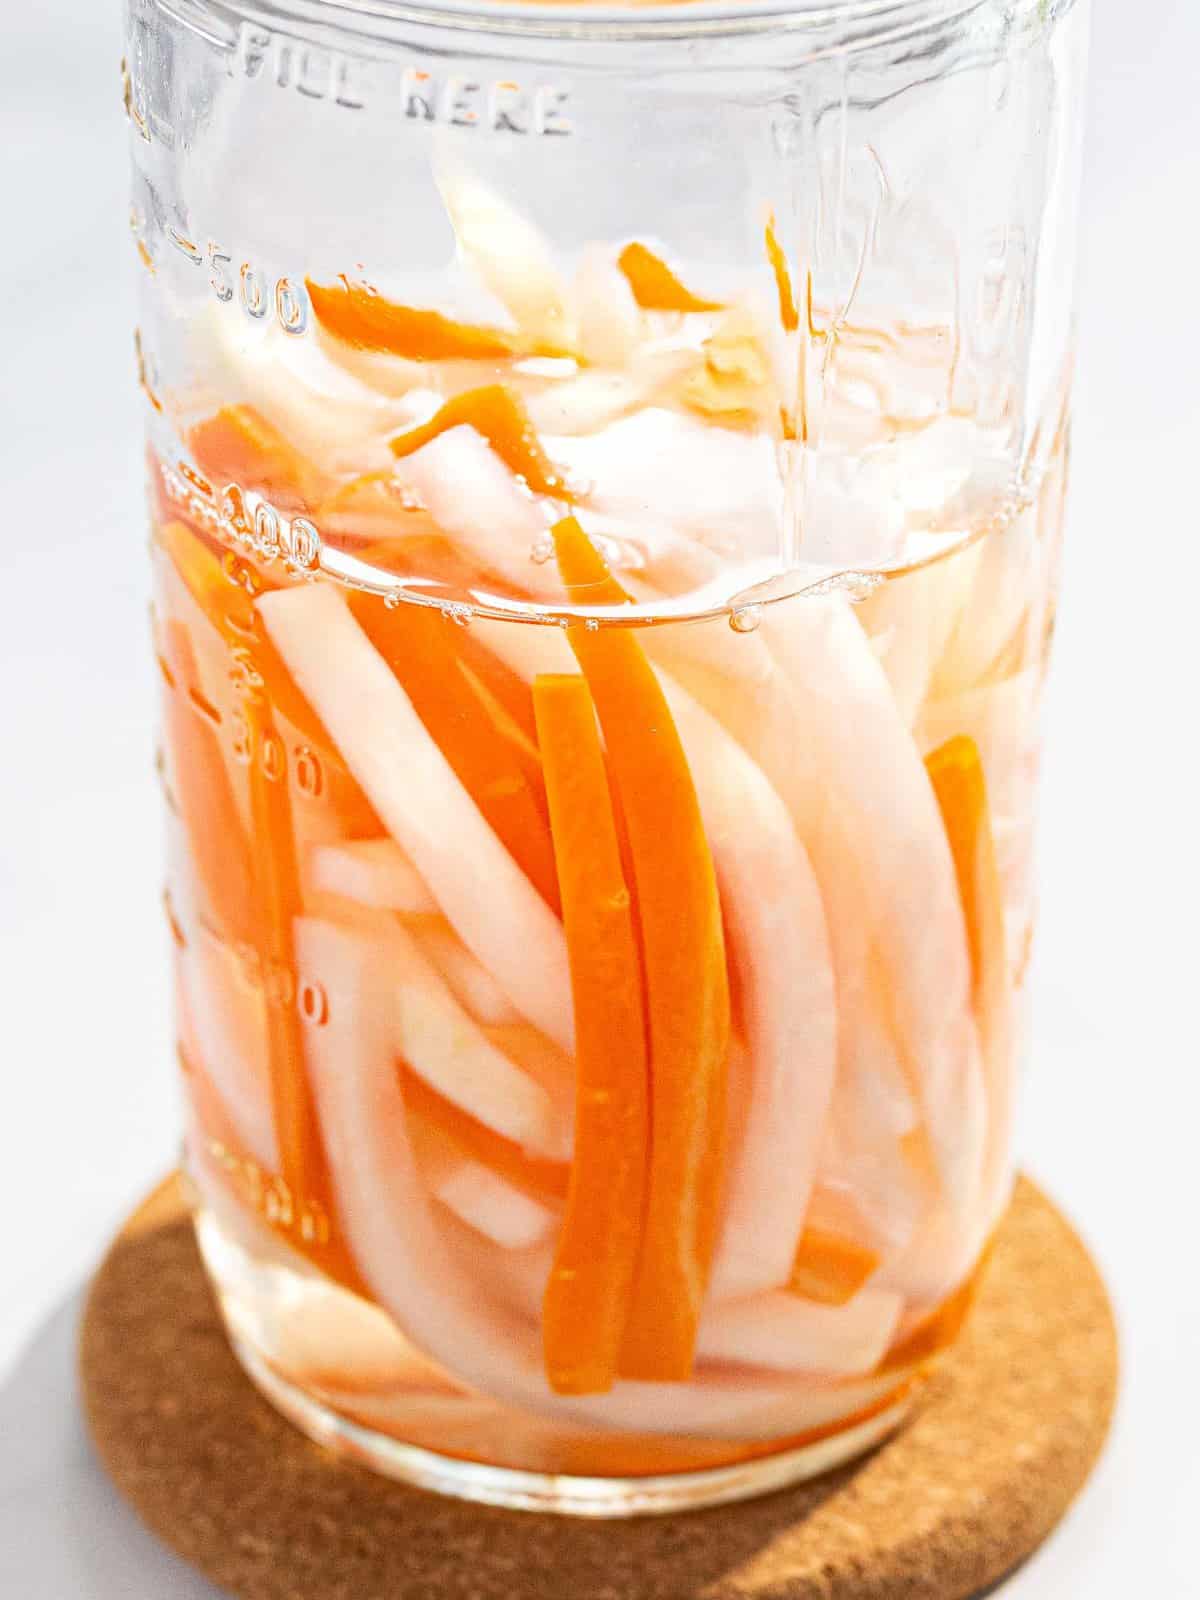 Vietnamese pickled carrots and daikon in a glass jar.